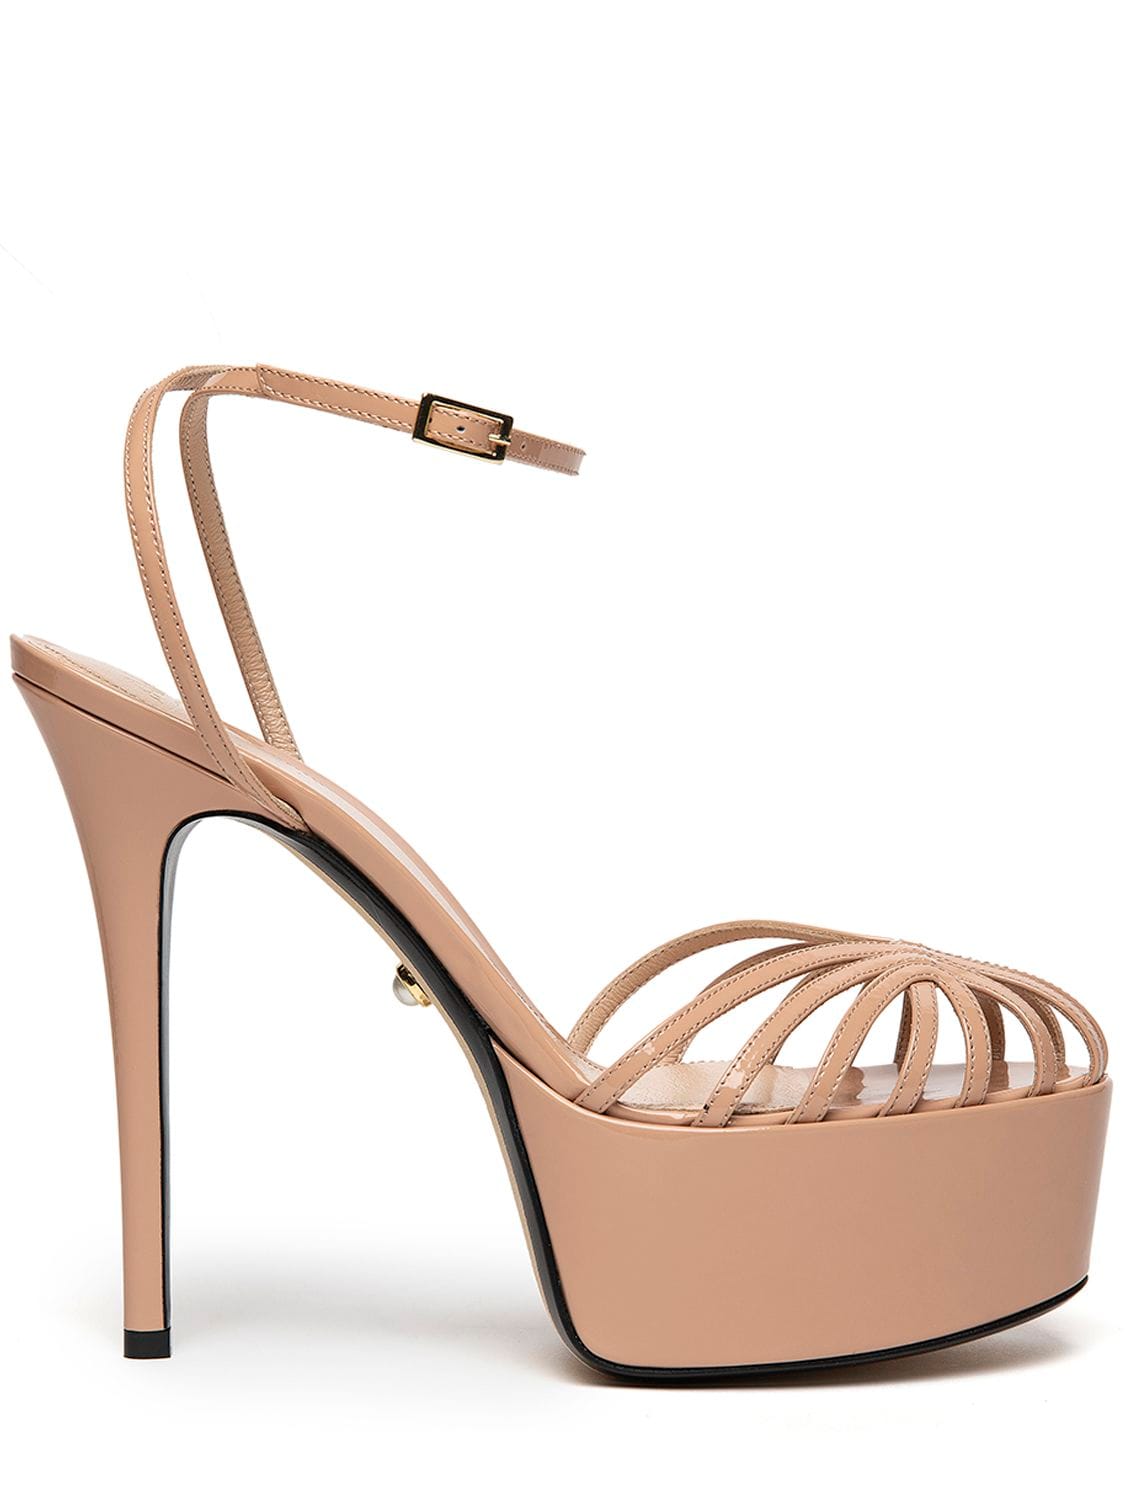 Alevì 95mm Clio Patent Leather Sandals In Nude